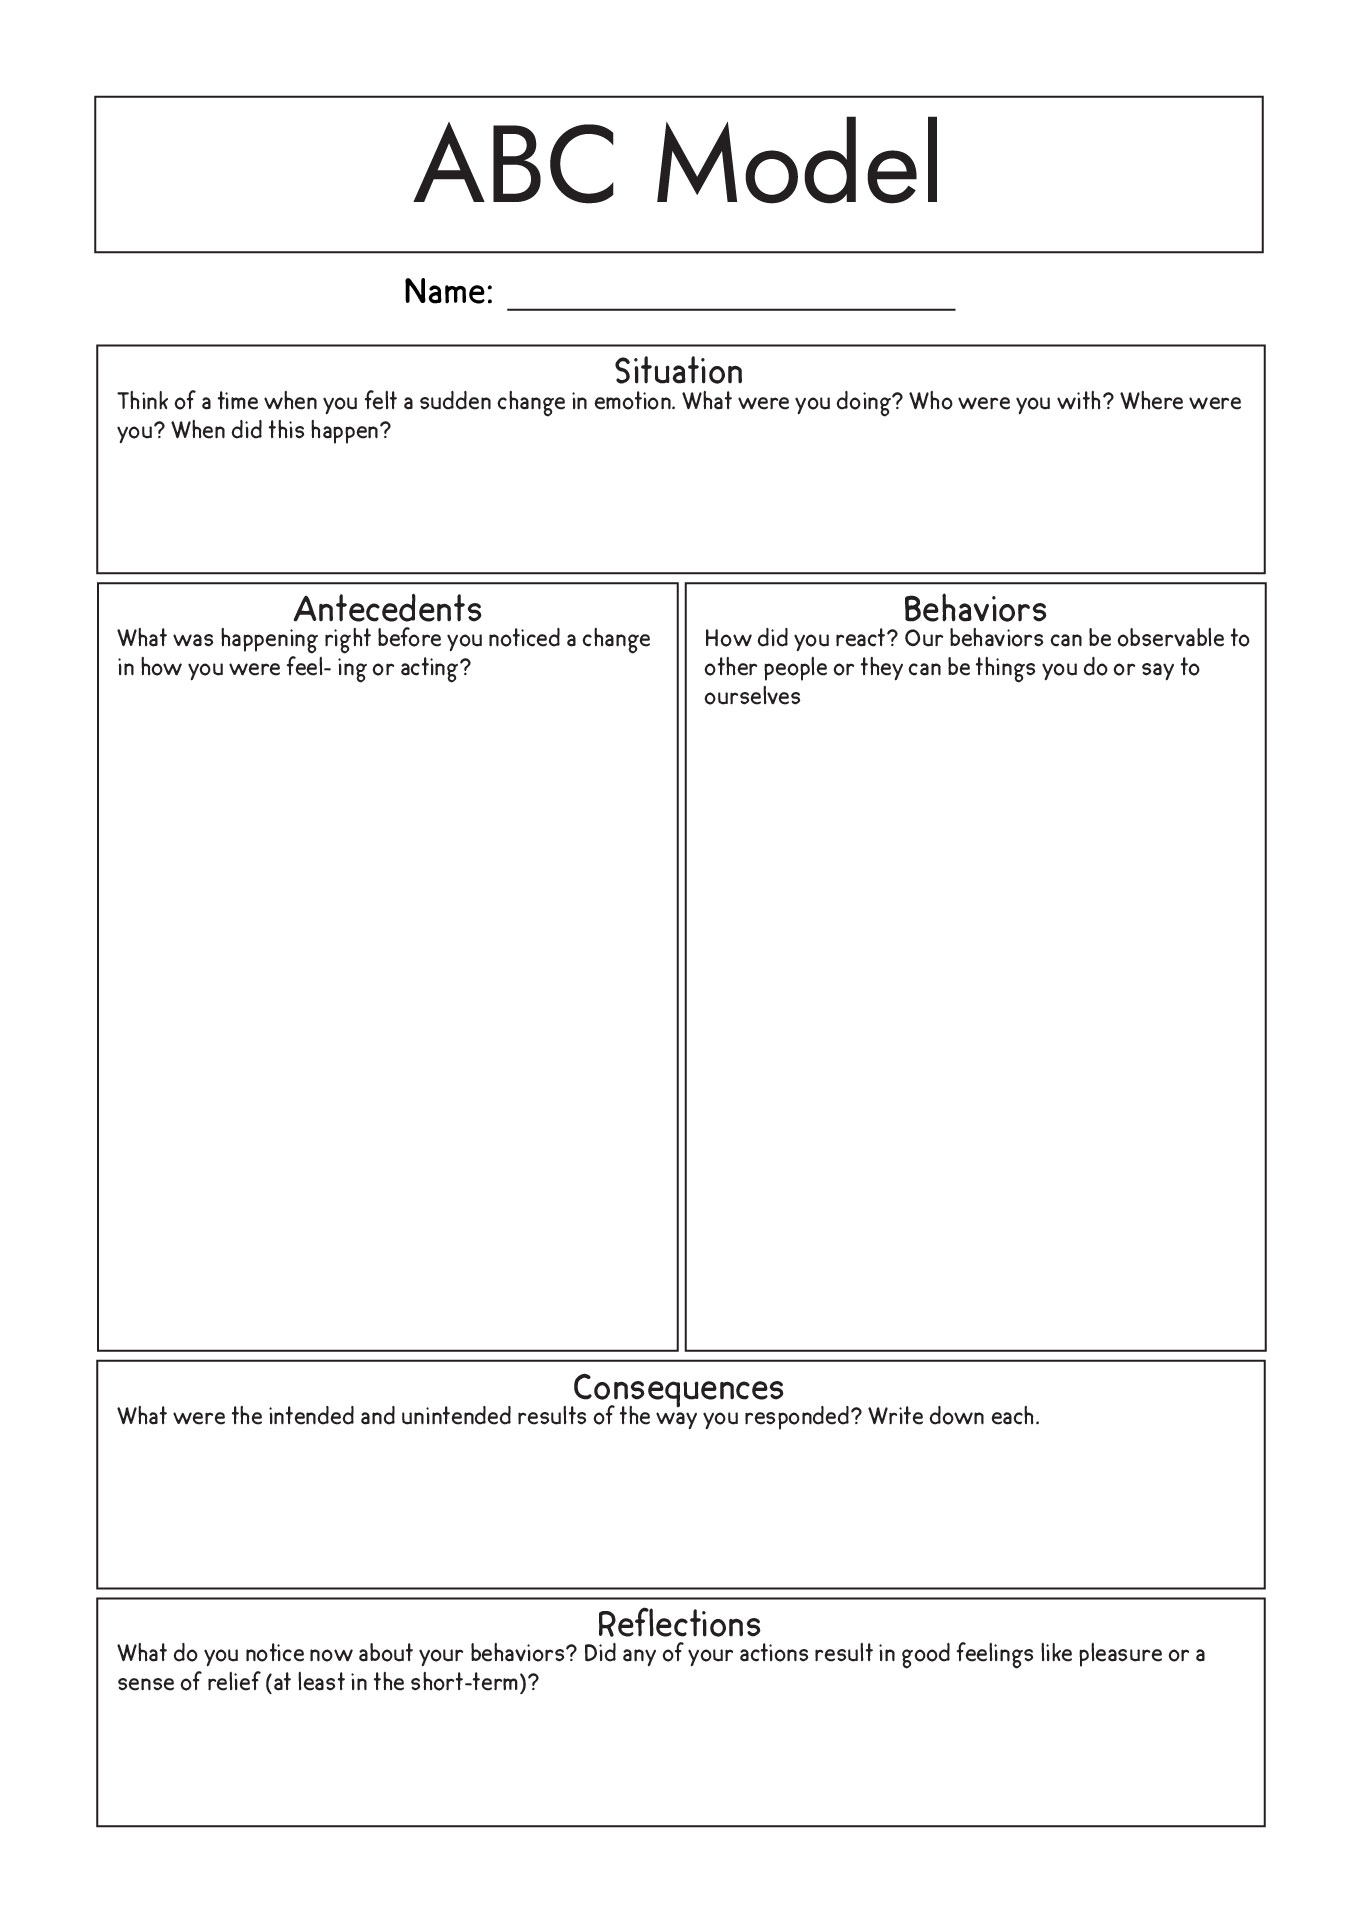 Cognitive Behavioral Therapy ABC Model